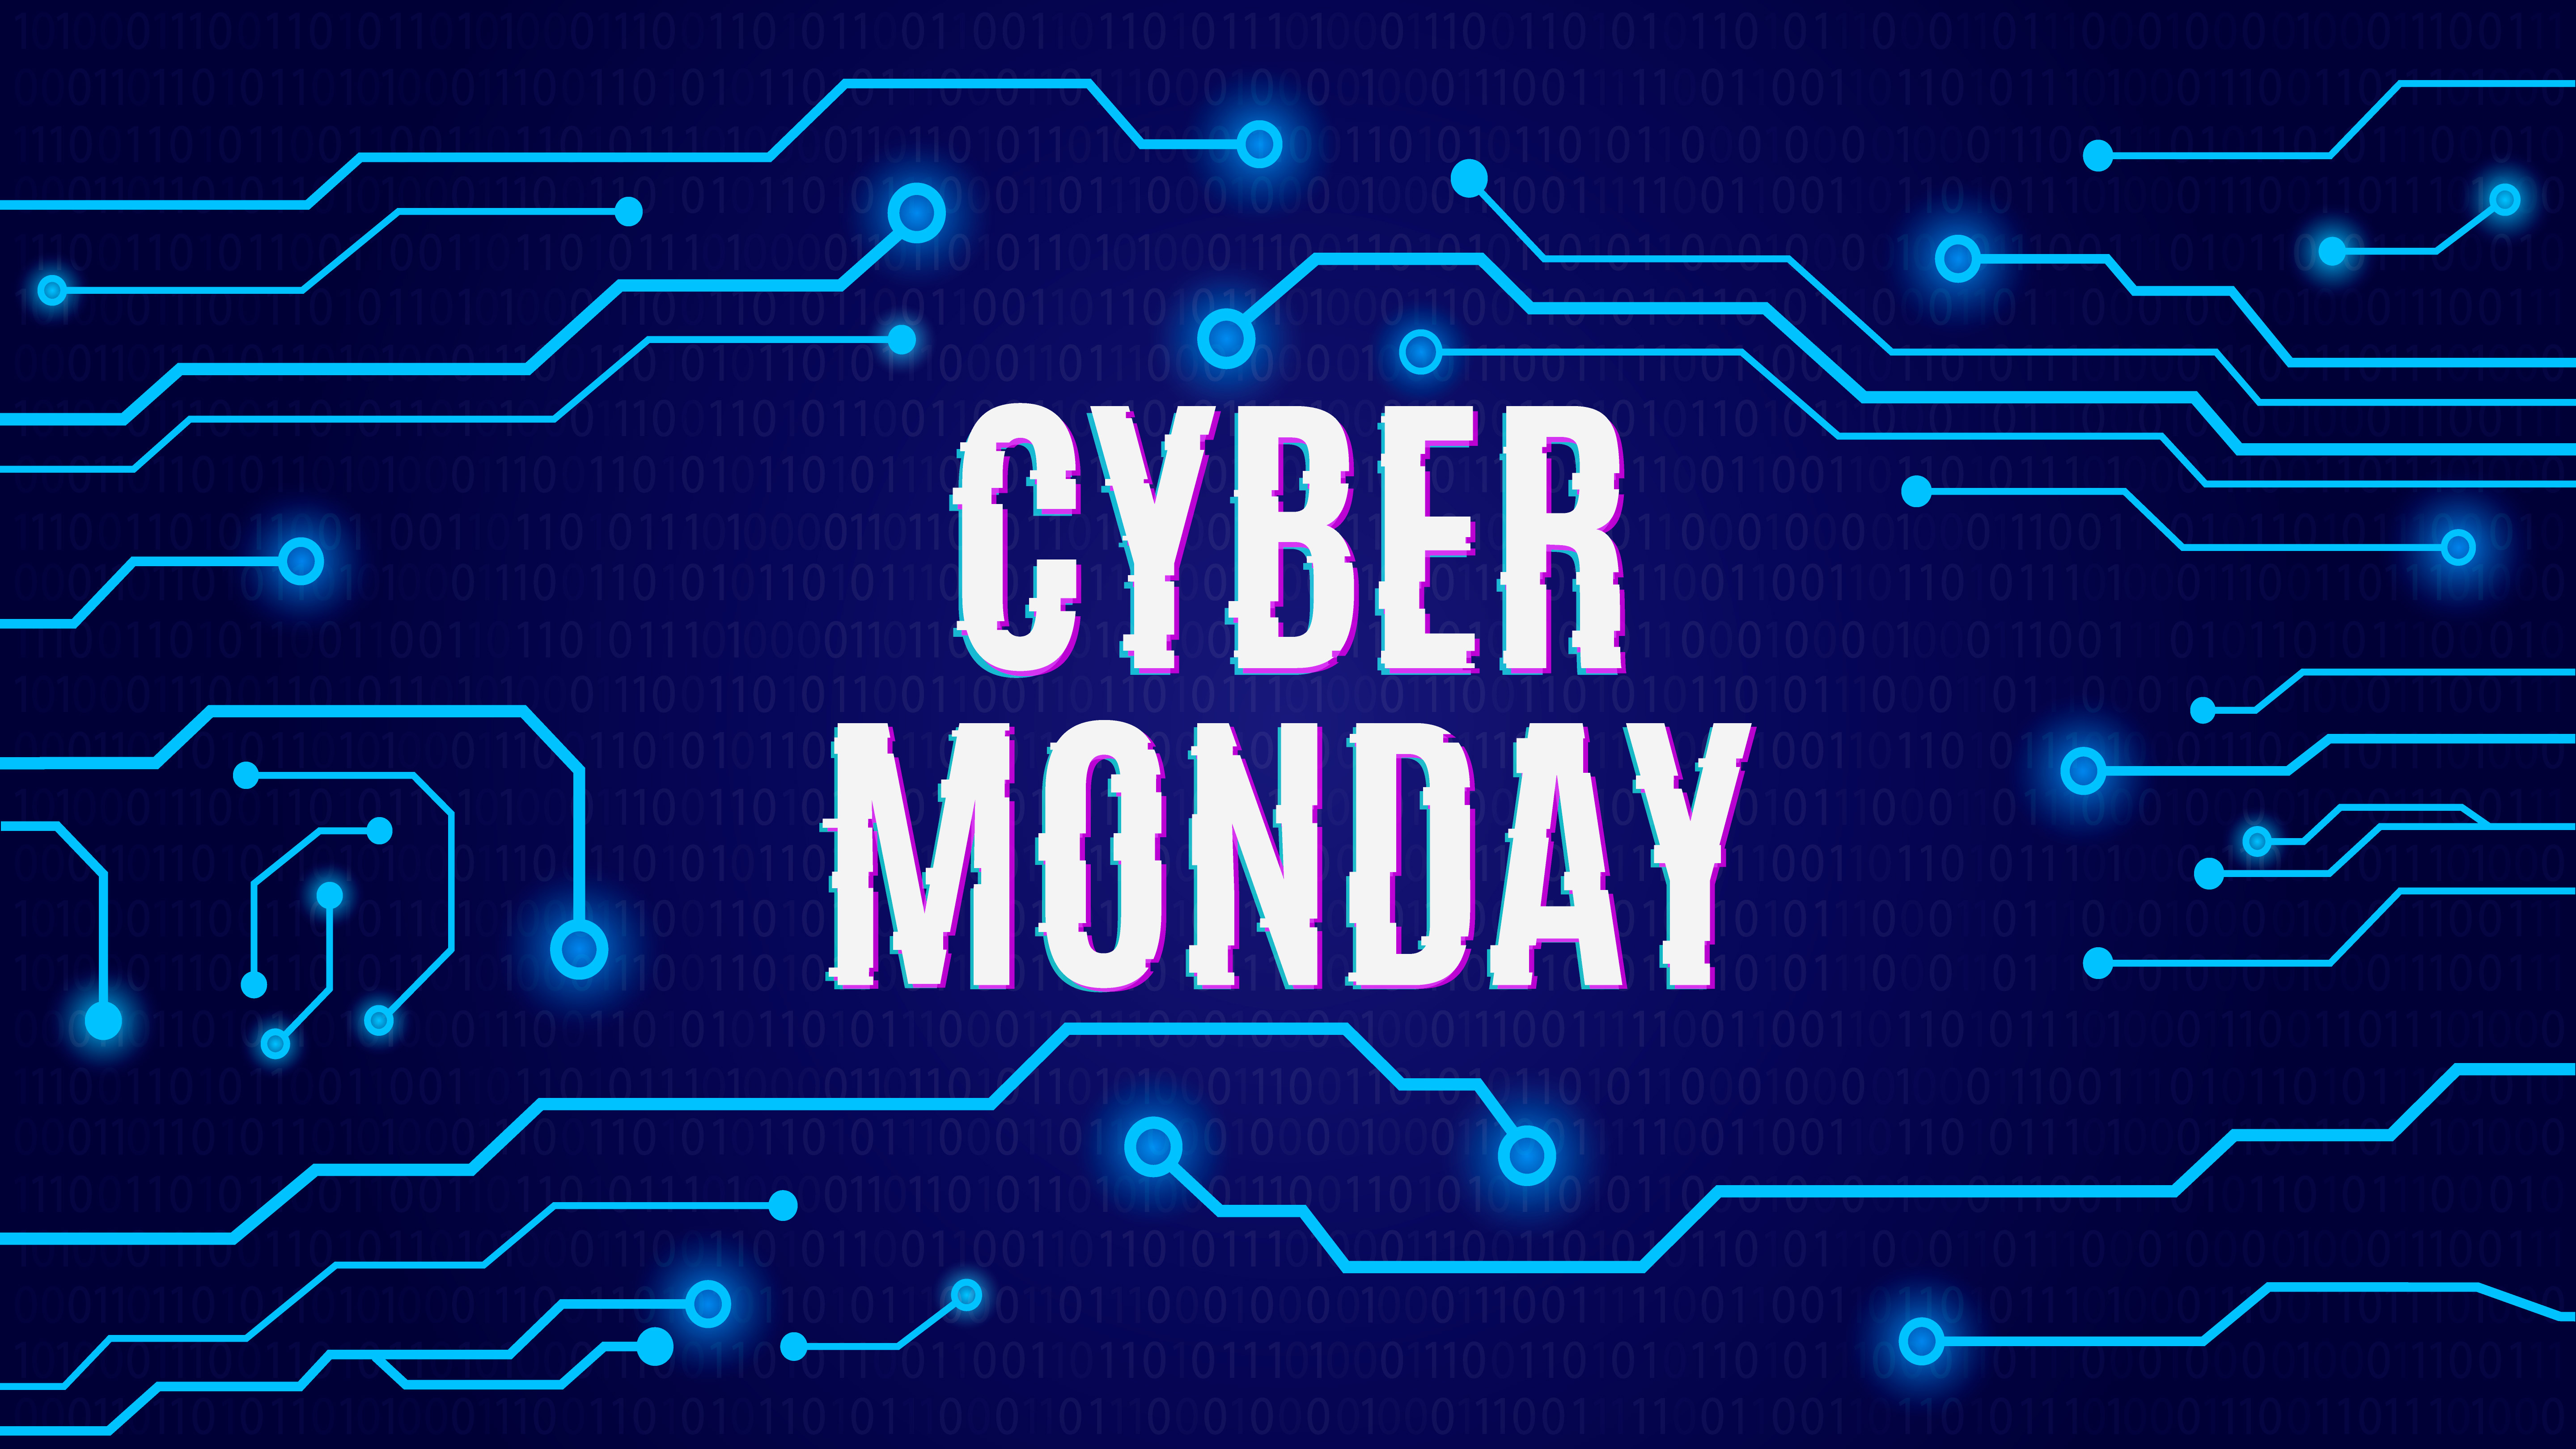 Cyber Monday Niche Blueprint: Earn on the Biggest Online Shopping Day